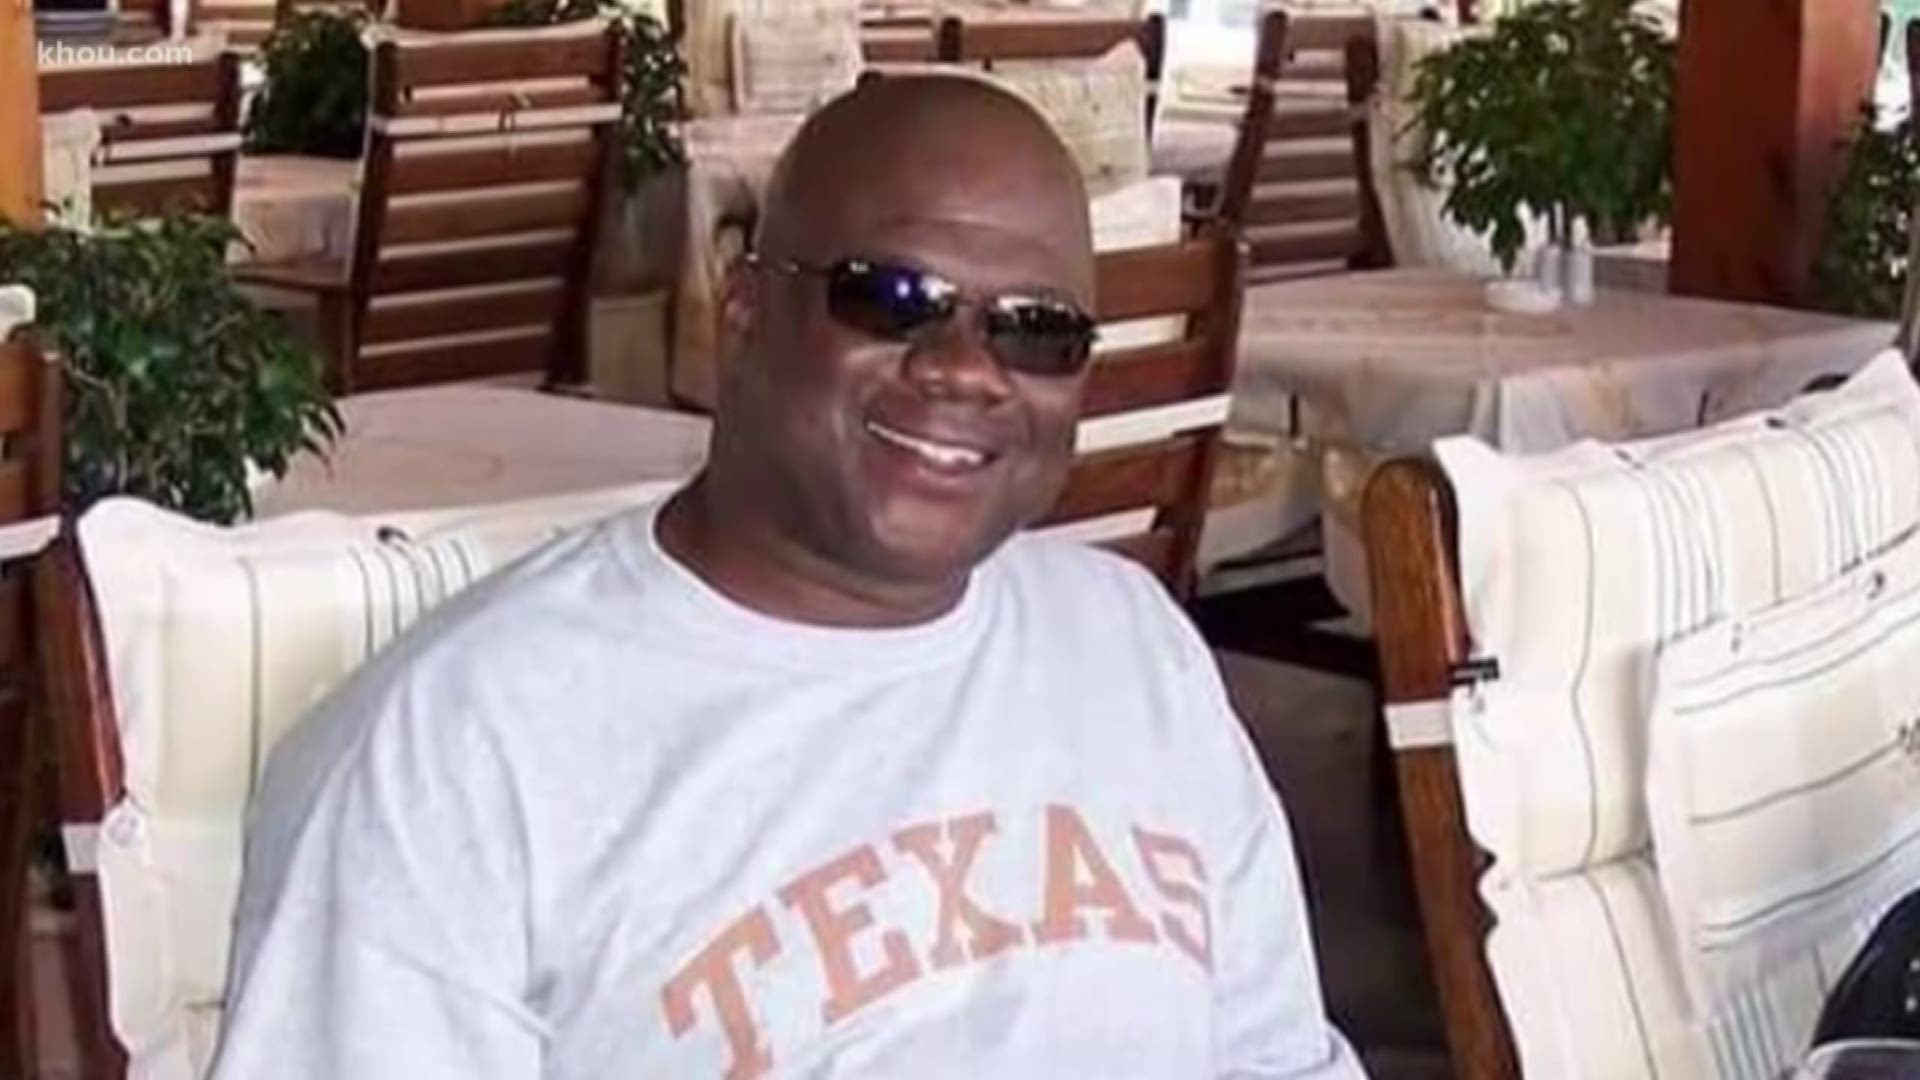 A Houston wants to make sure a Texas veteran gets a proper burial and tribute after he died in his apartment but wasn't found until three years later.